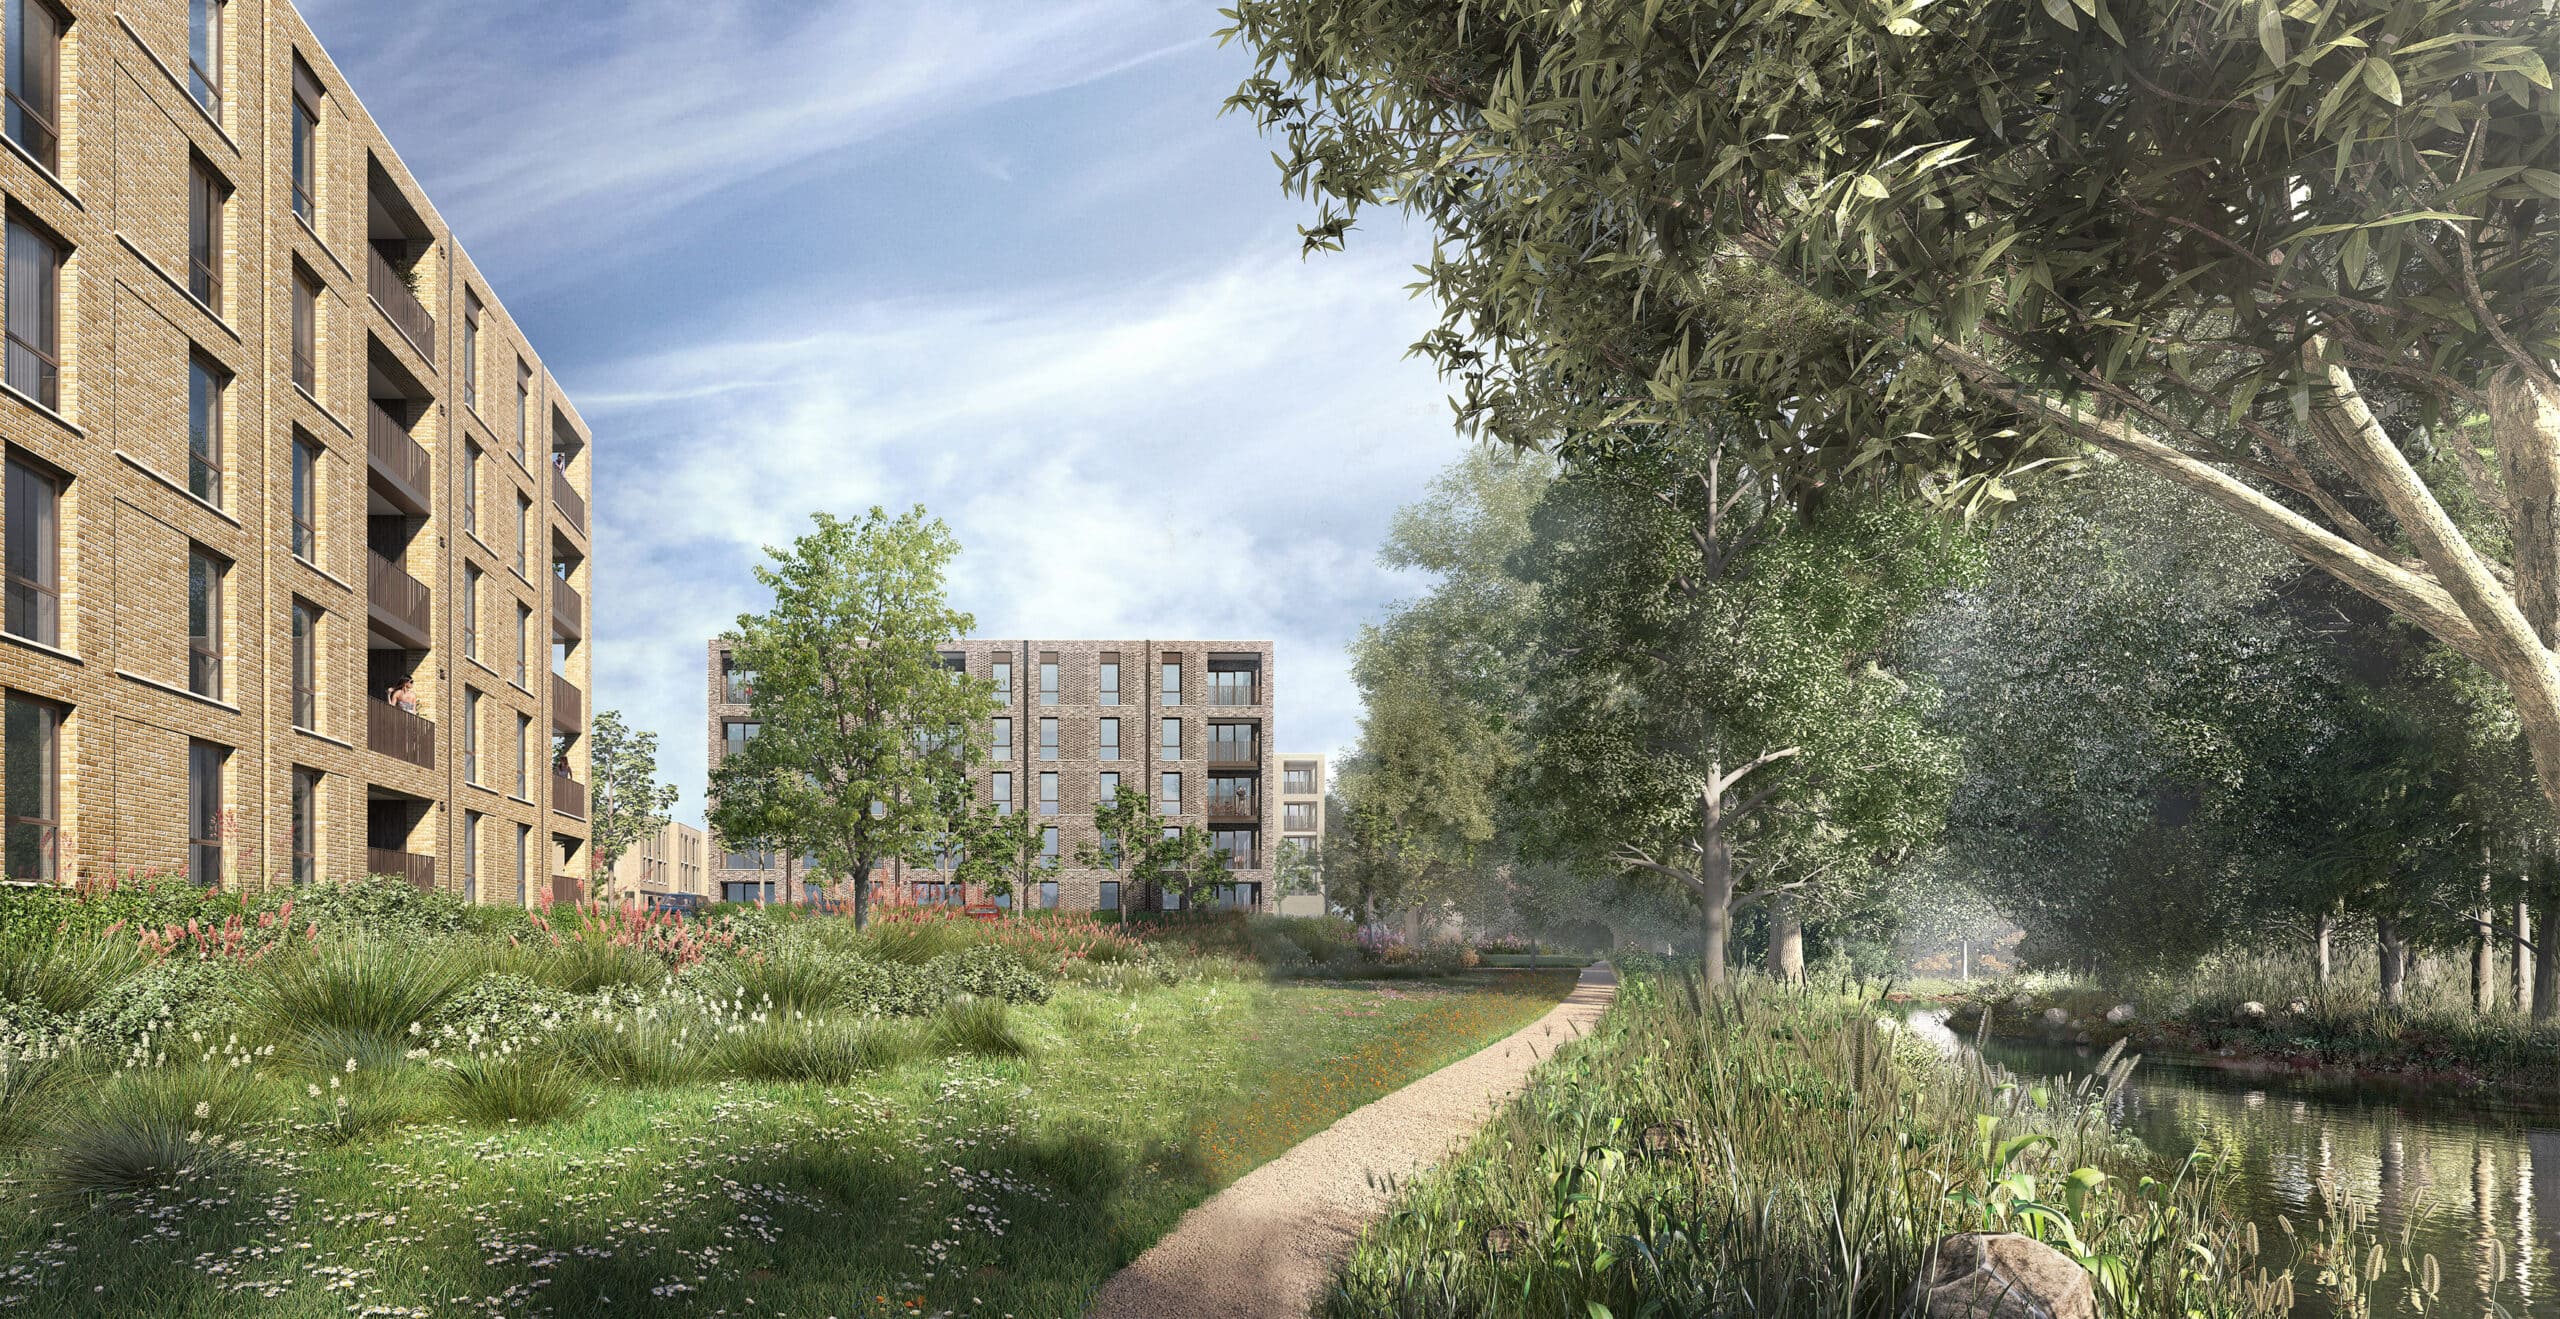 External CGI of Catalyst's Newman Place - search for Shared Ownership homes on Share to Buy